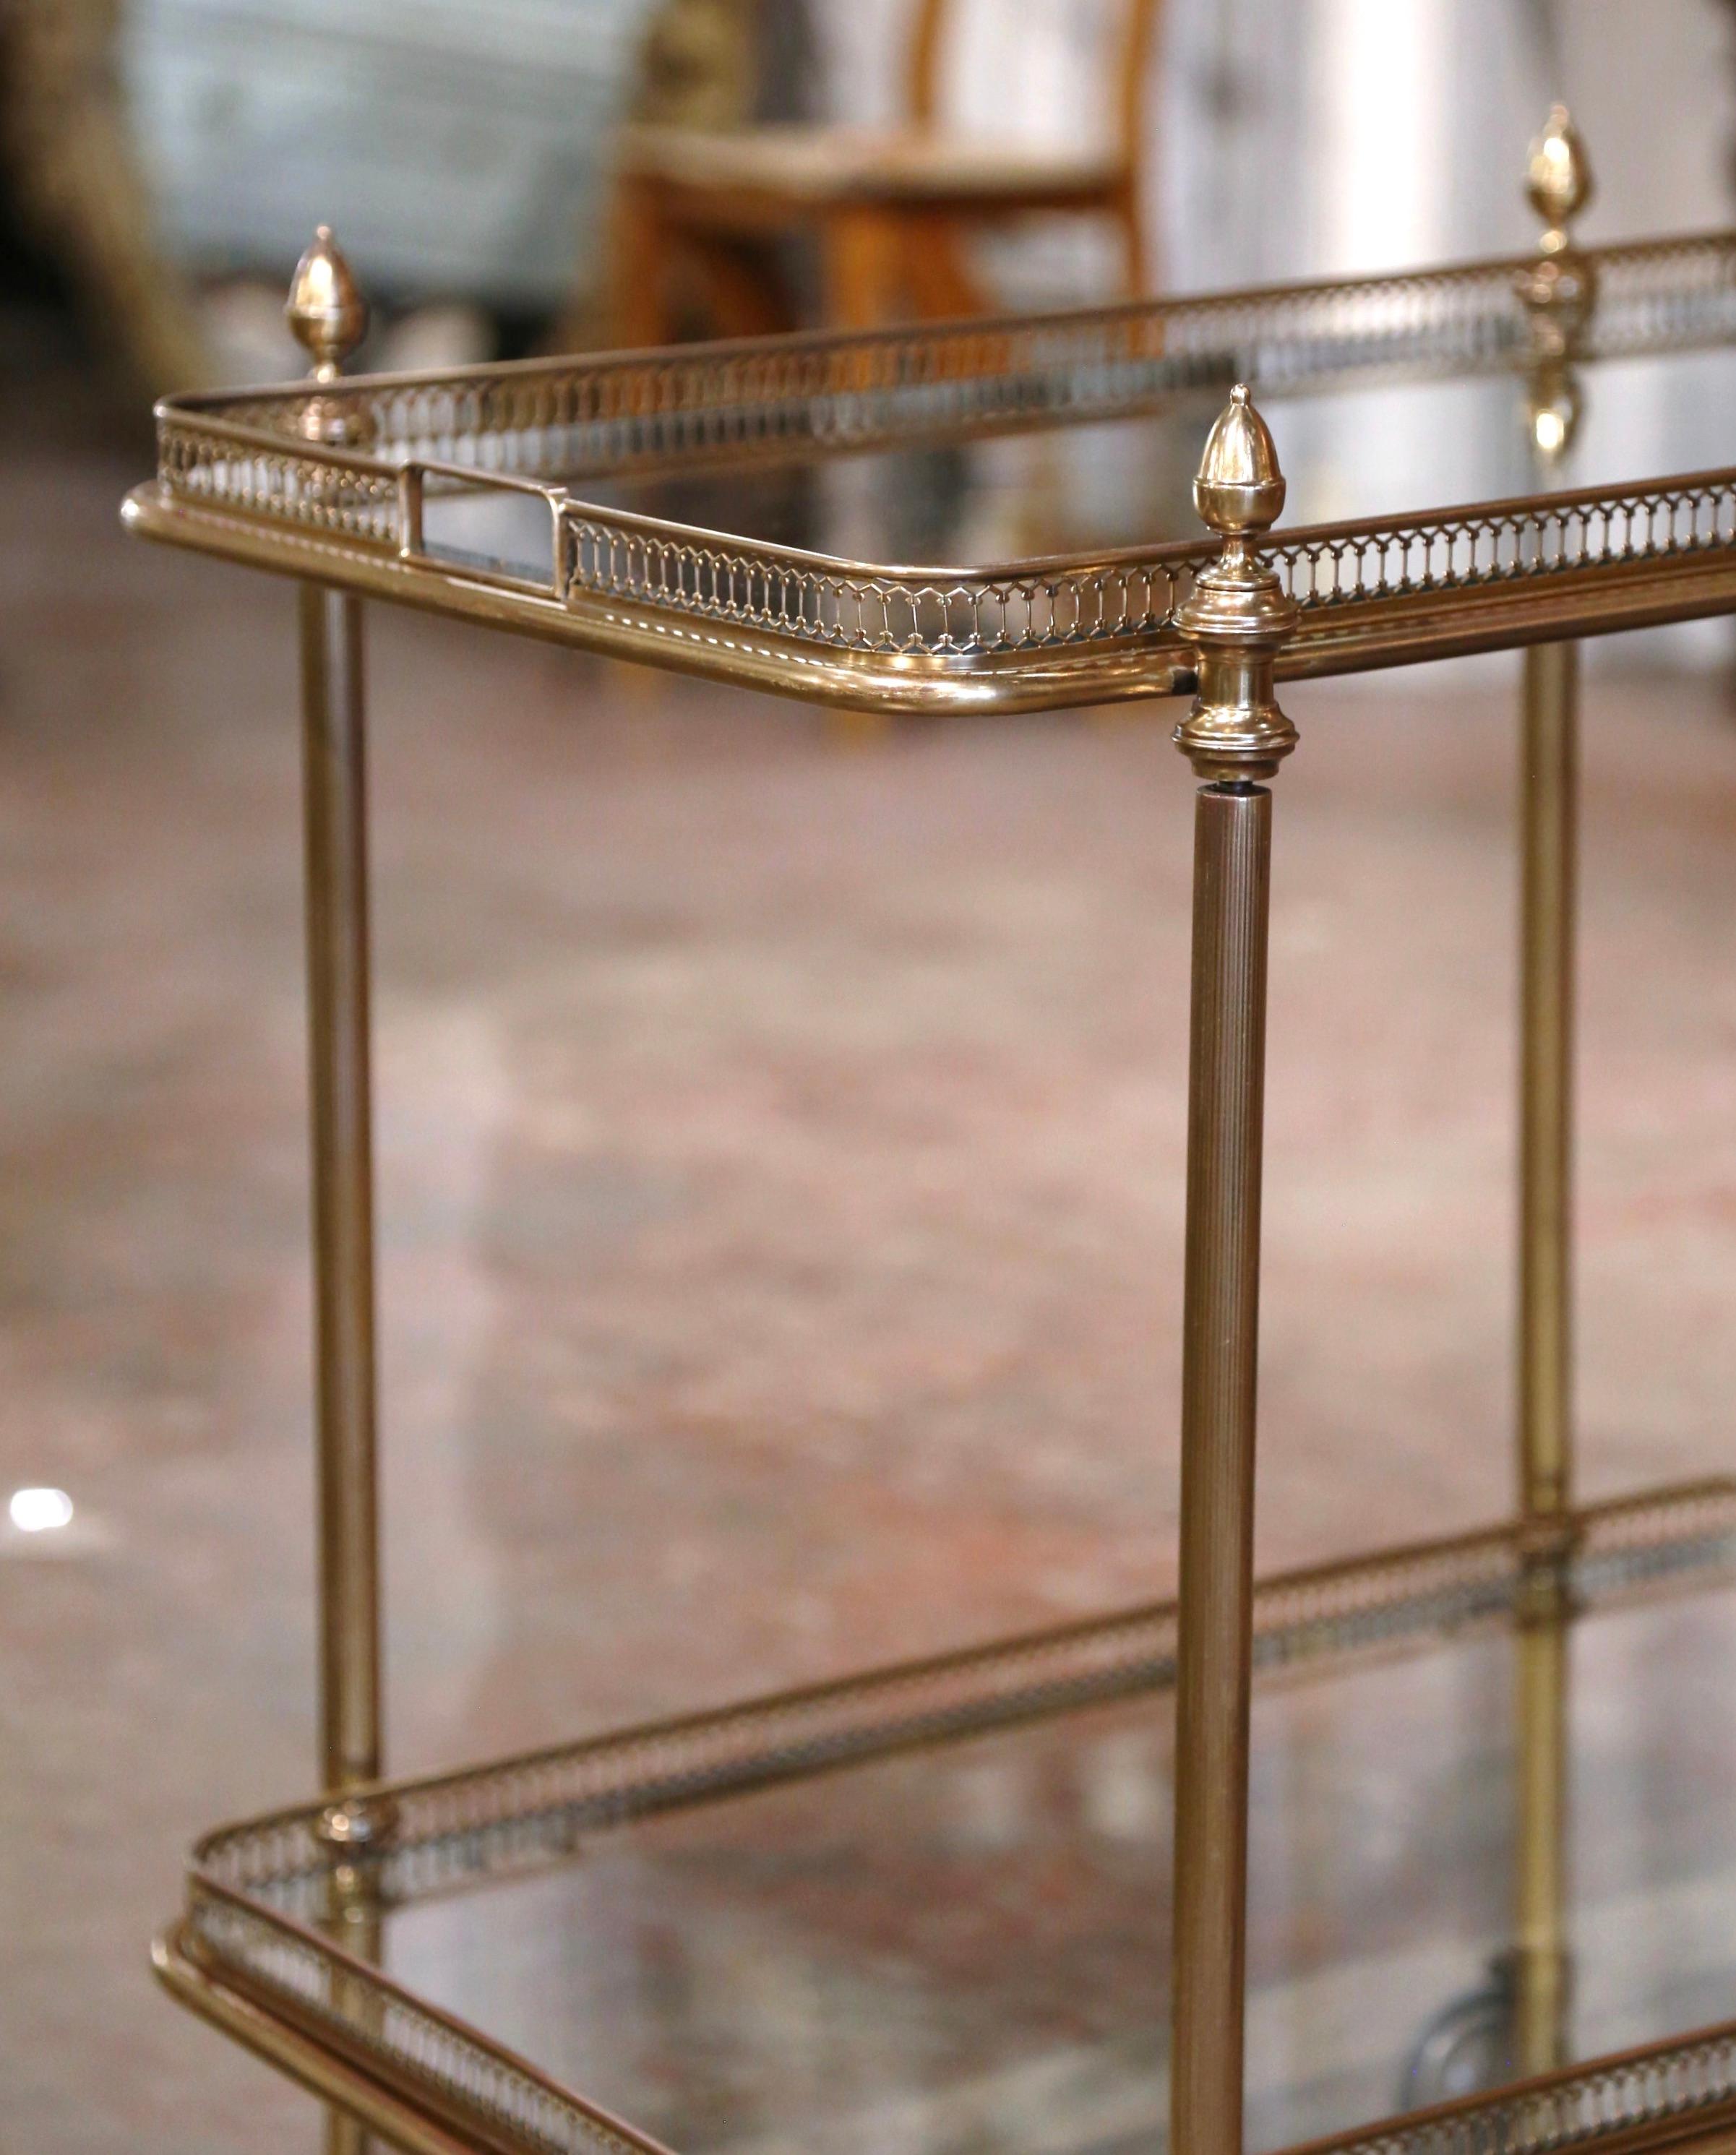 Early 20th Century French Gilt Brass Two-Tier Service Trolley Bar Cart on Wheels 5